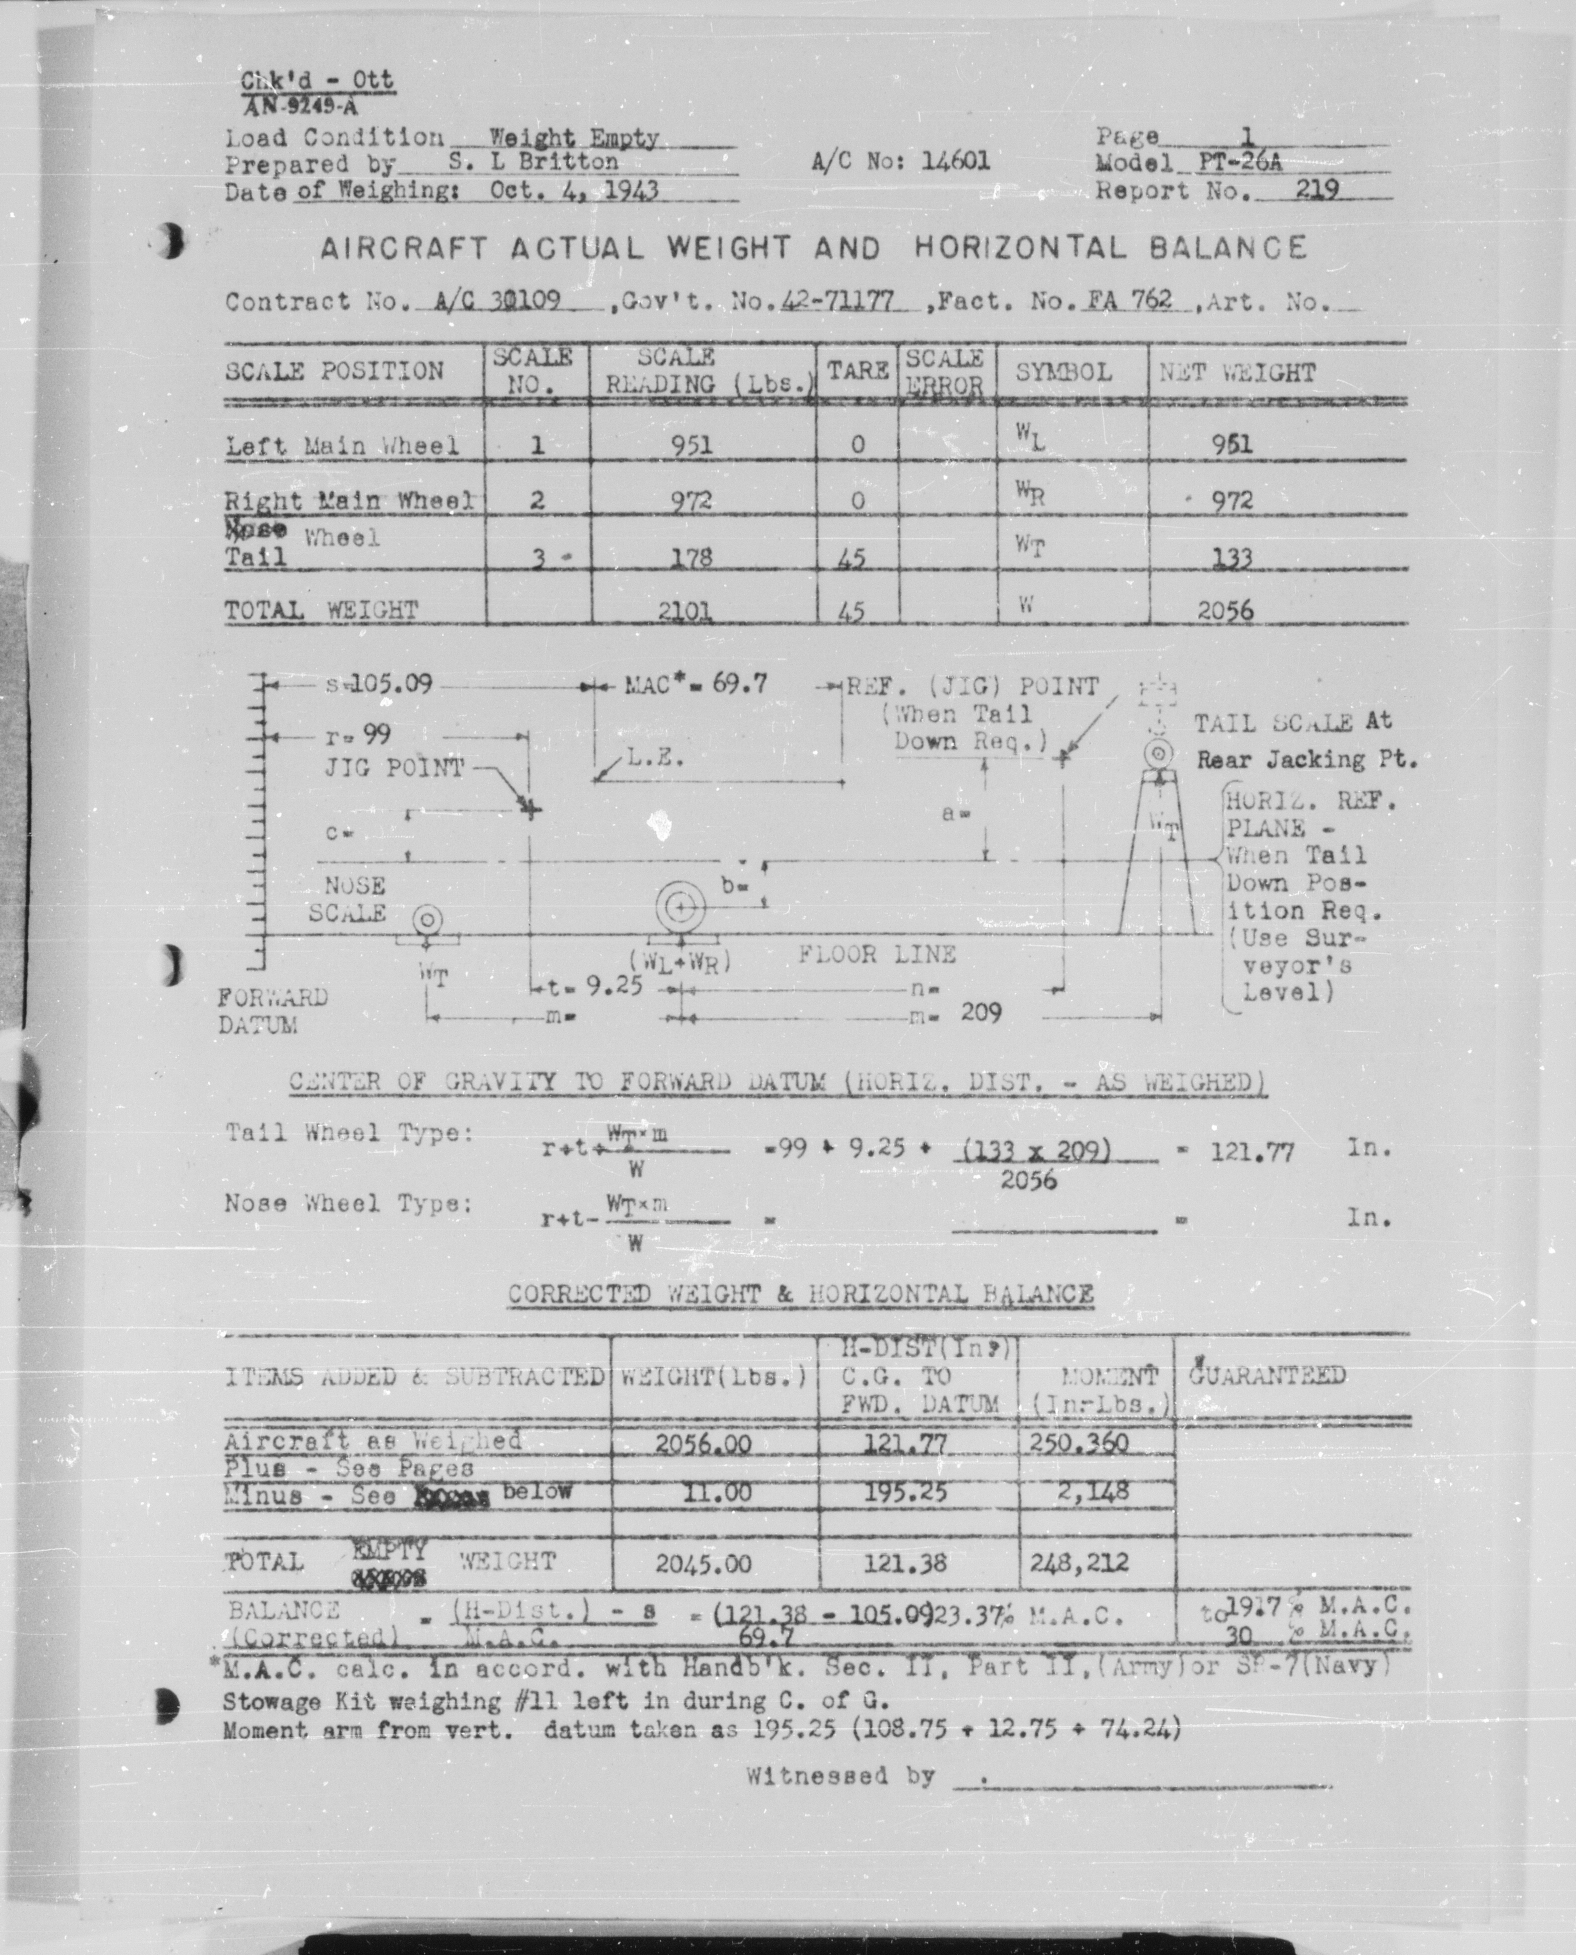 Sample page 3 from AirCorps Library document: Actual Weight and Balance Report for Model PT-26A